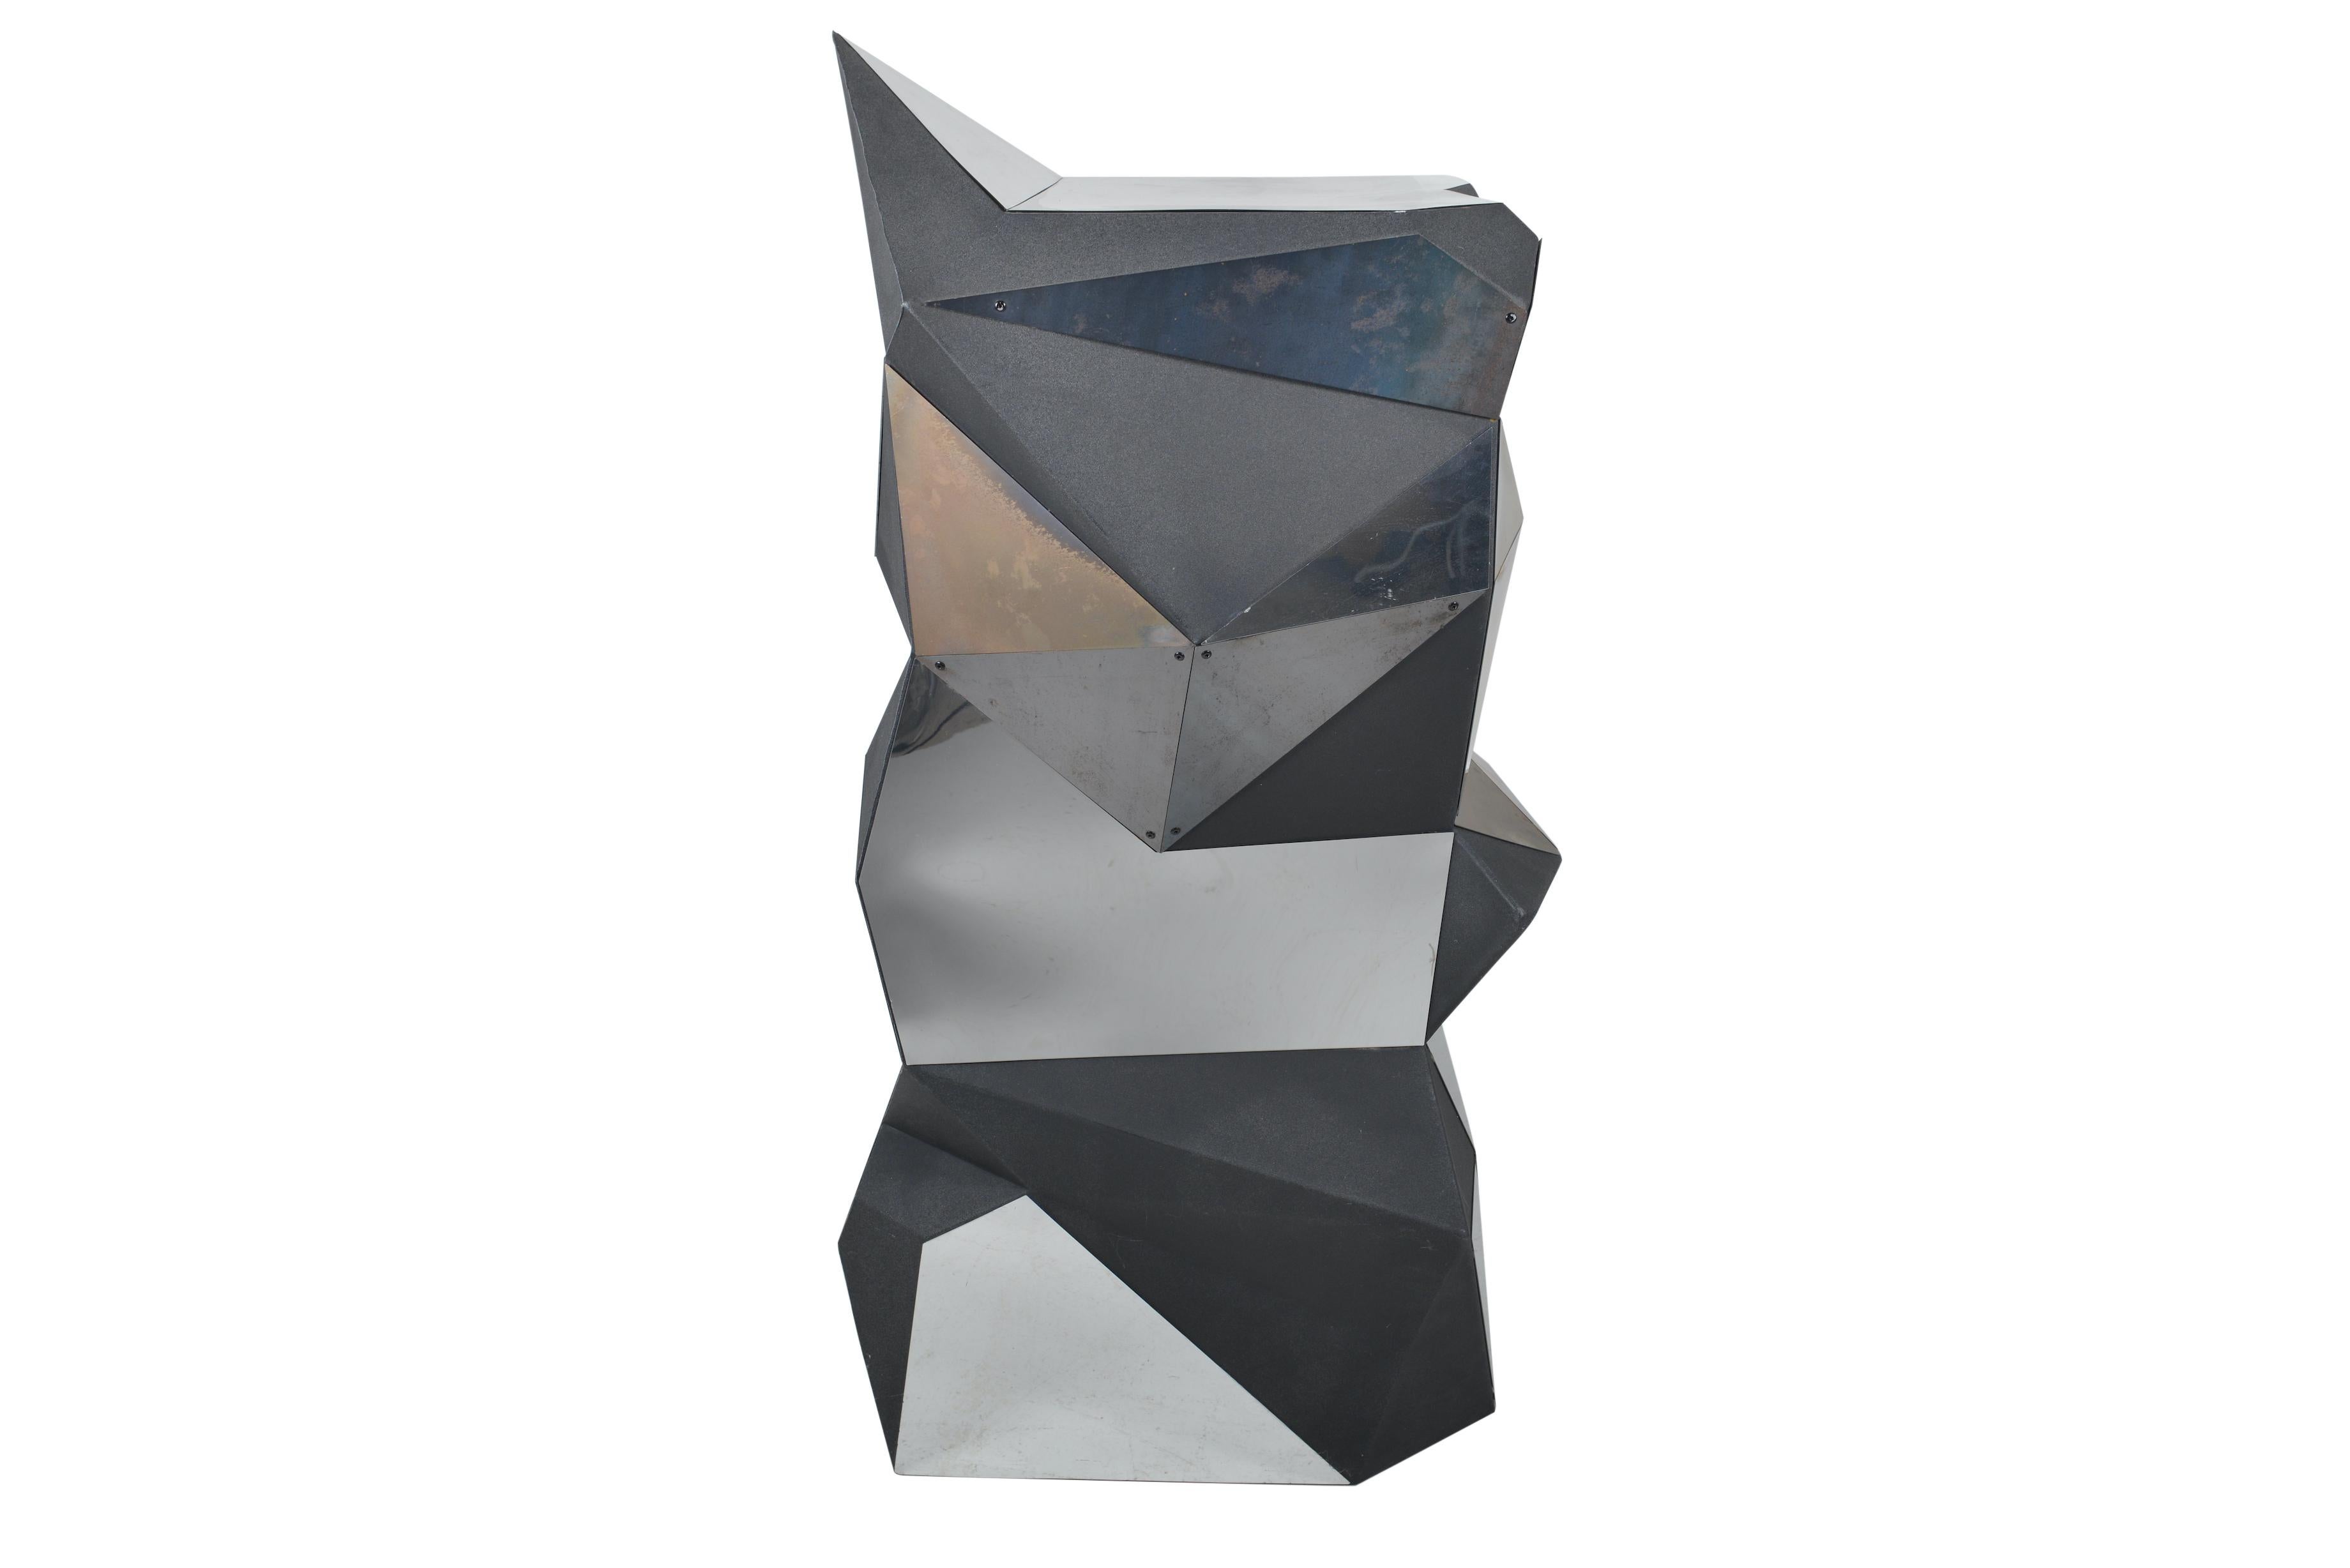 A quirky pedestal or object in black foam with plexi mirror shapes in triangular asymmetrical balance, forming a multifaceted curious object.